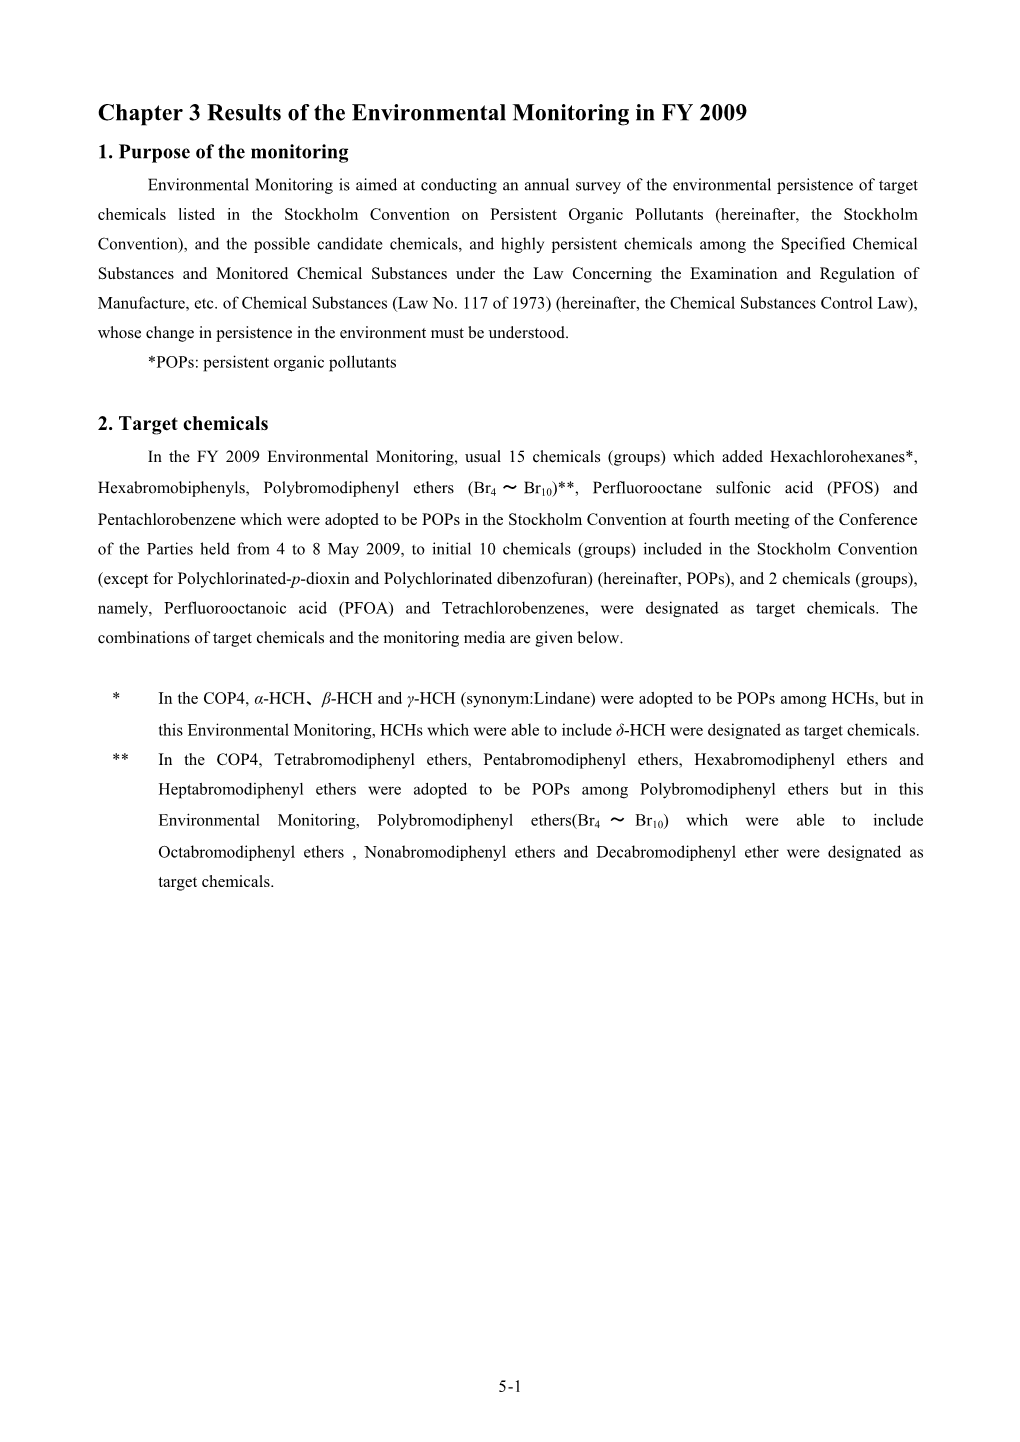 Chapter 3 Results of Environmental Monitoring in FY 2009